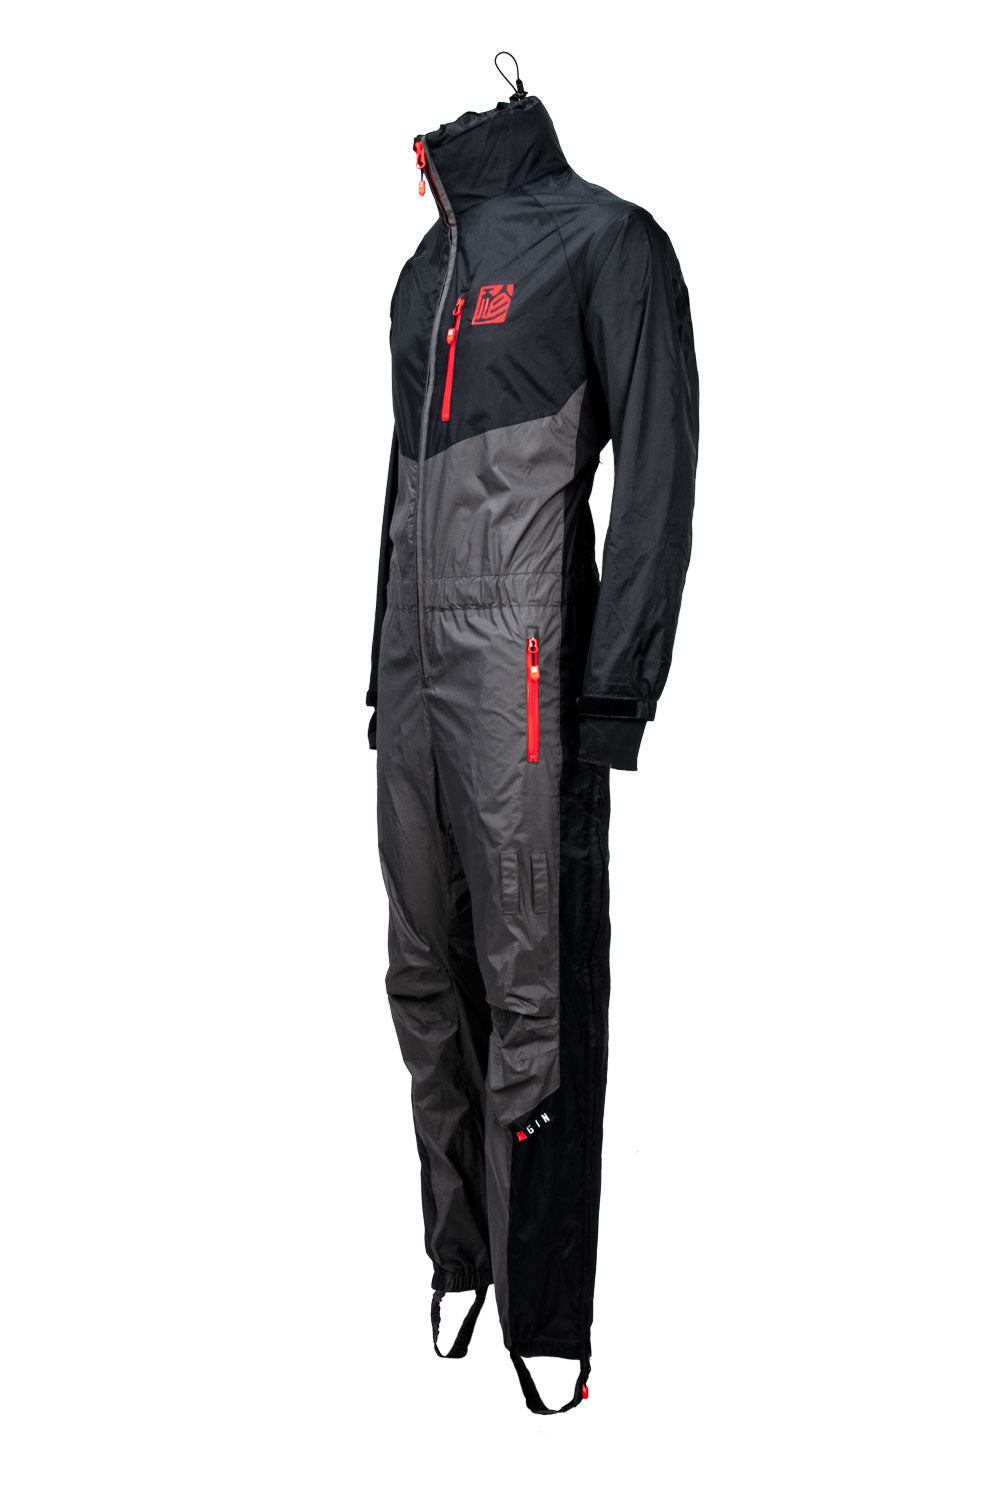 black and grey flying suit